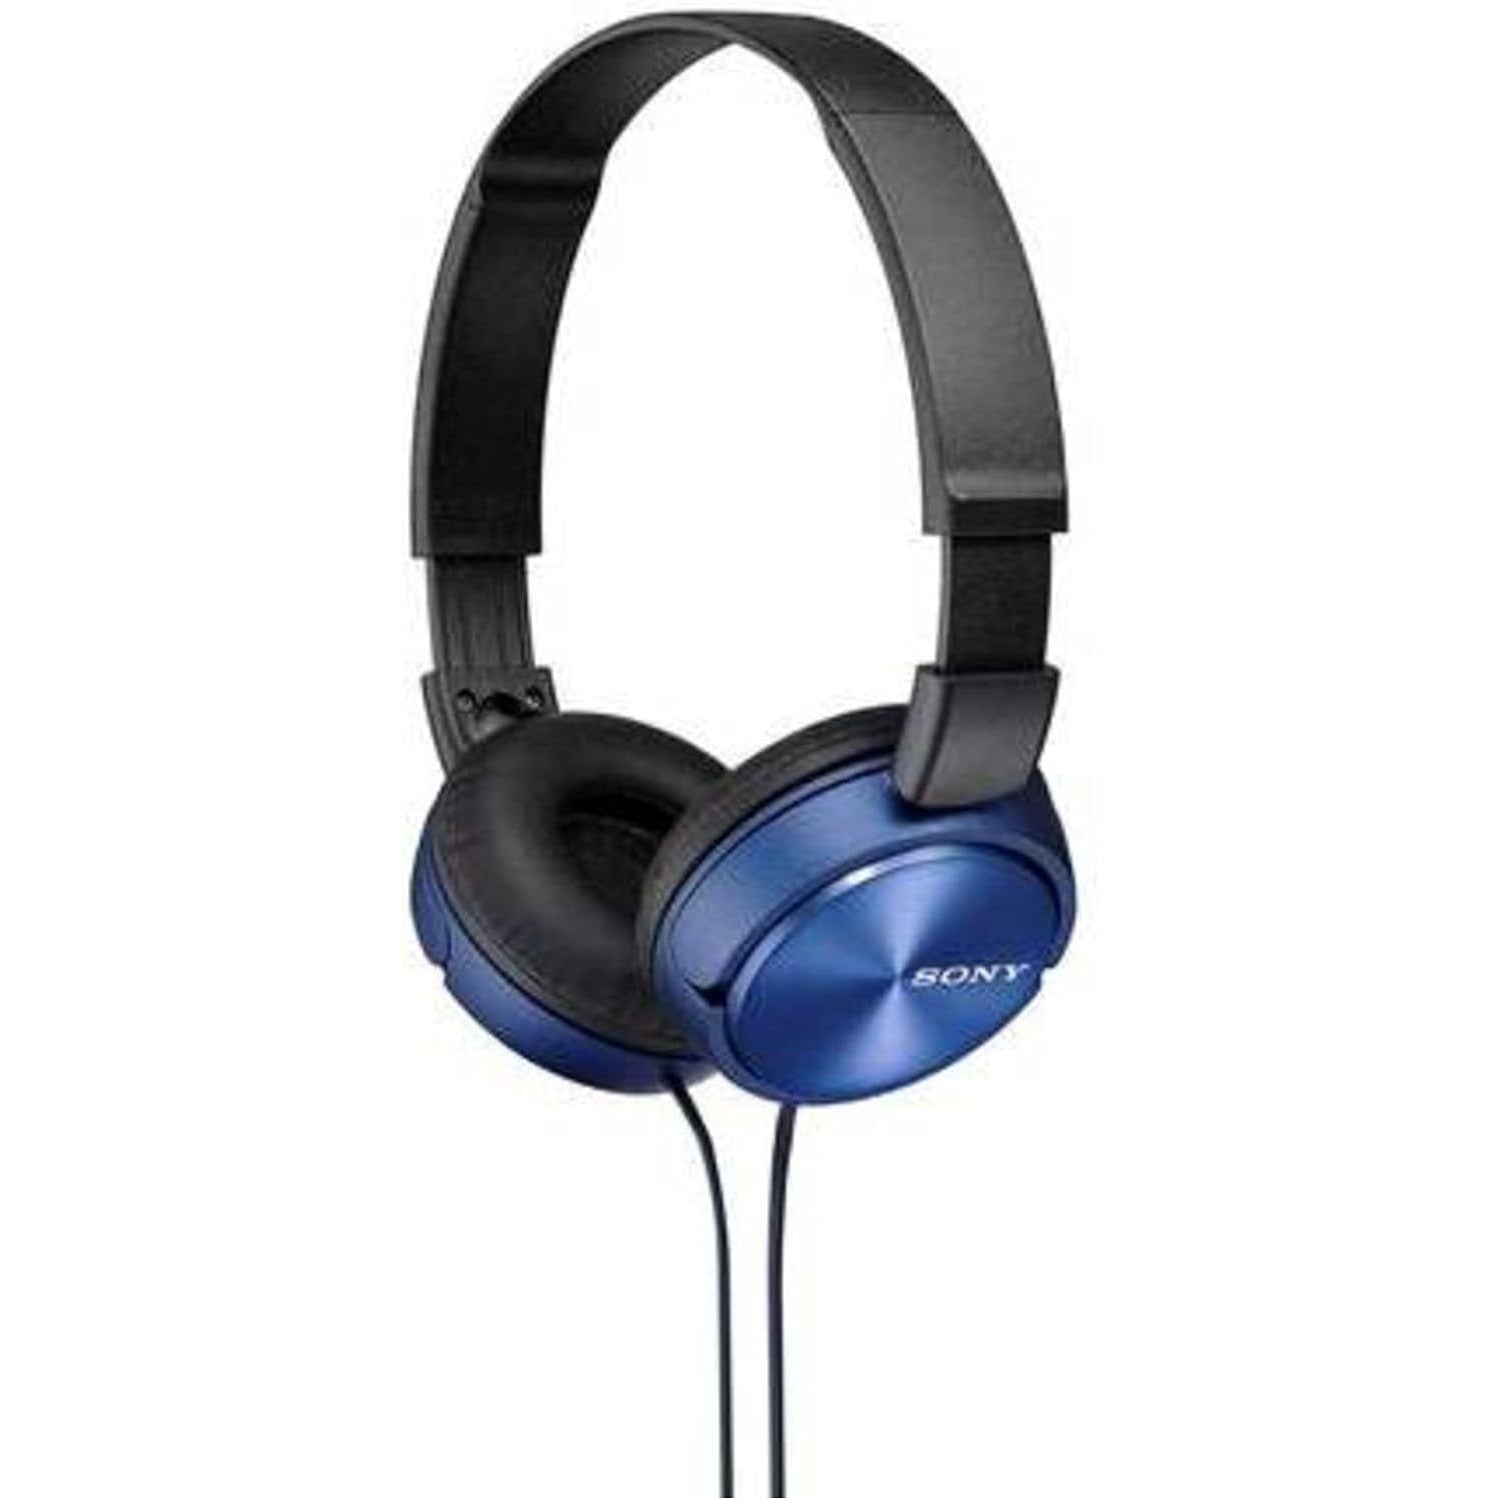 Sony MDR-ZX310AP On-Ear Headphones Compatible with Smartphones, Tablets and MP3 Devices - Metallic Blue